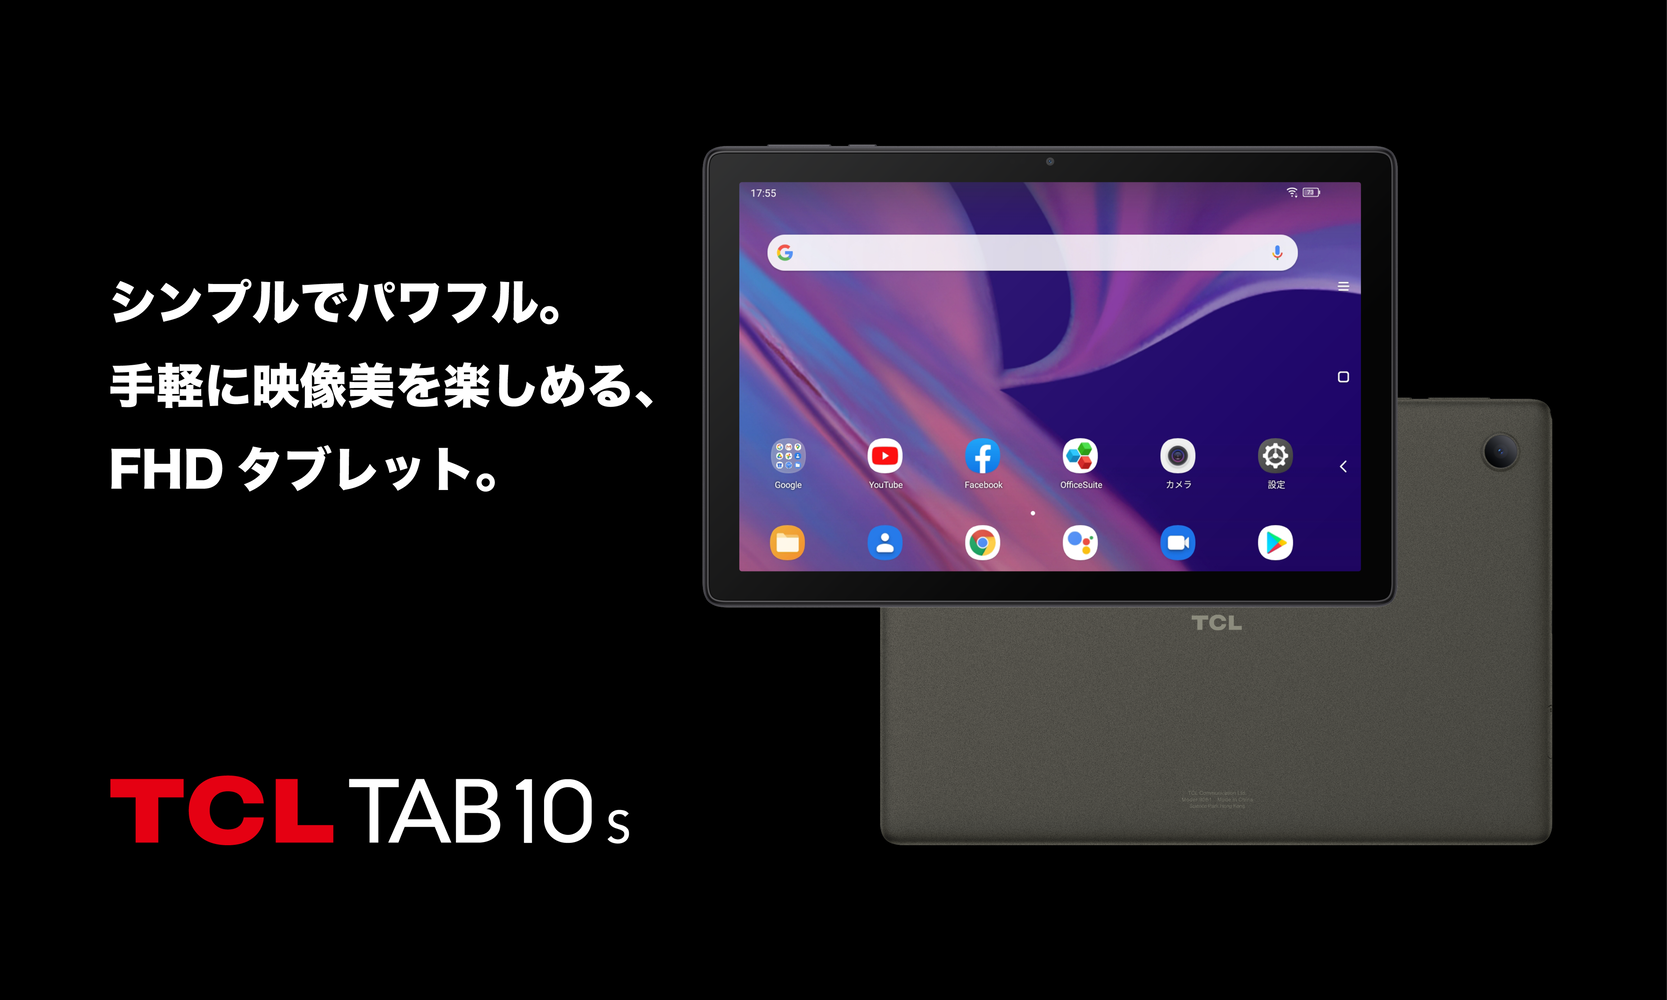 au+1 collectionに「TCL TAB 10s」、2万2720円 - ケータイ Watch